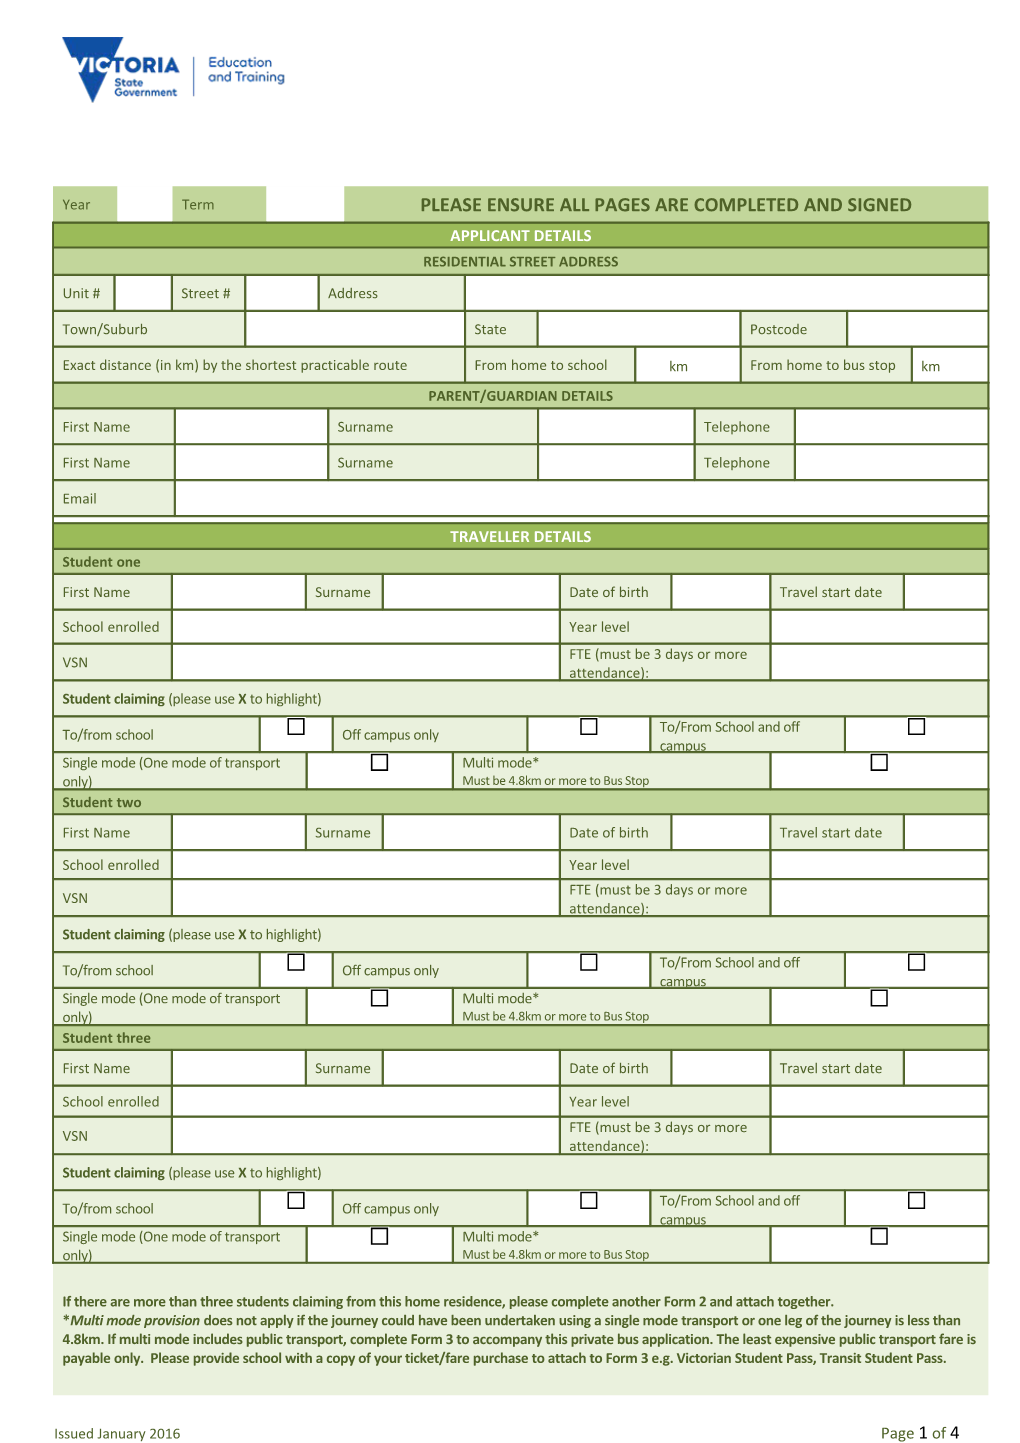 Form 2 - Application for Private Bus Travel